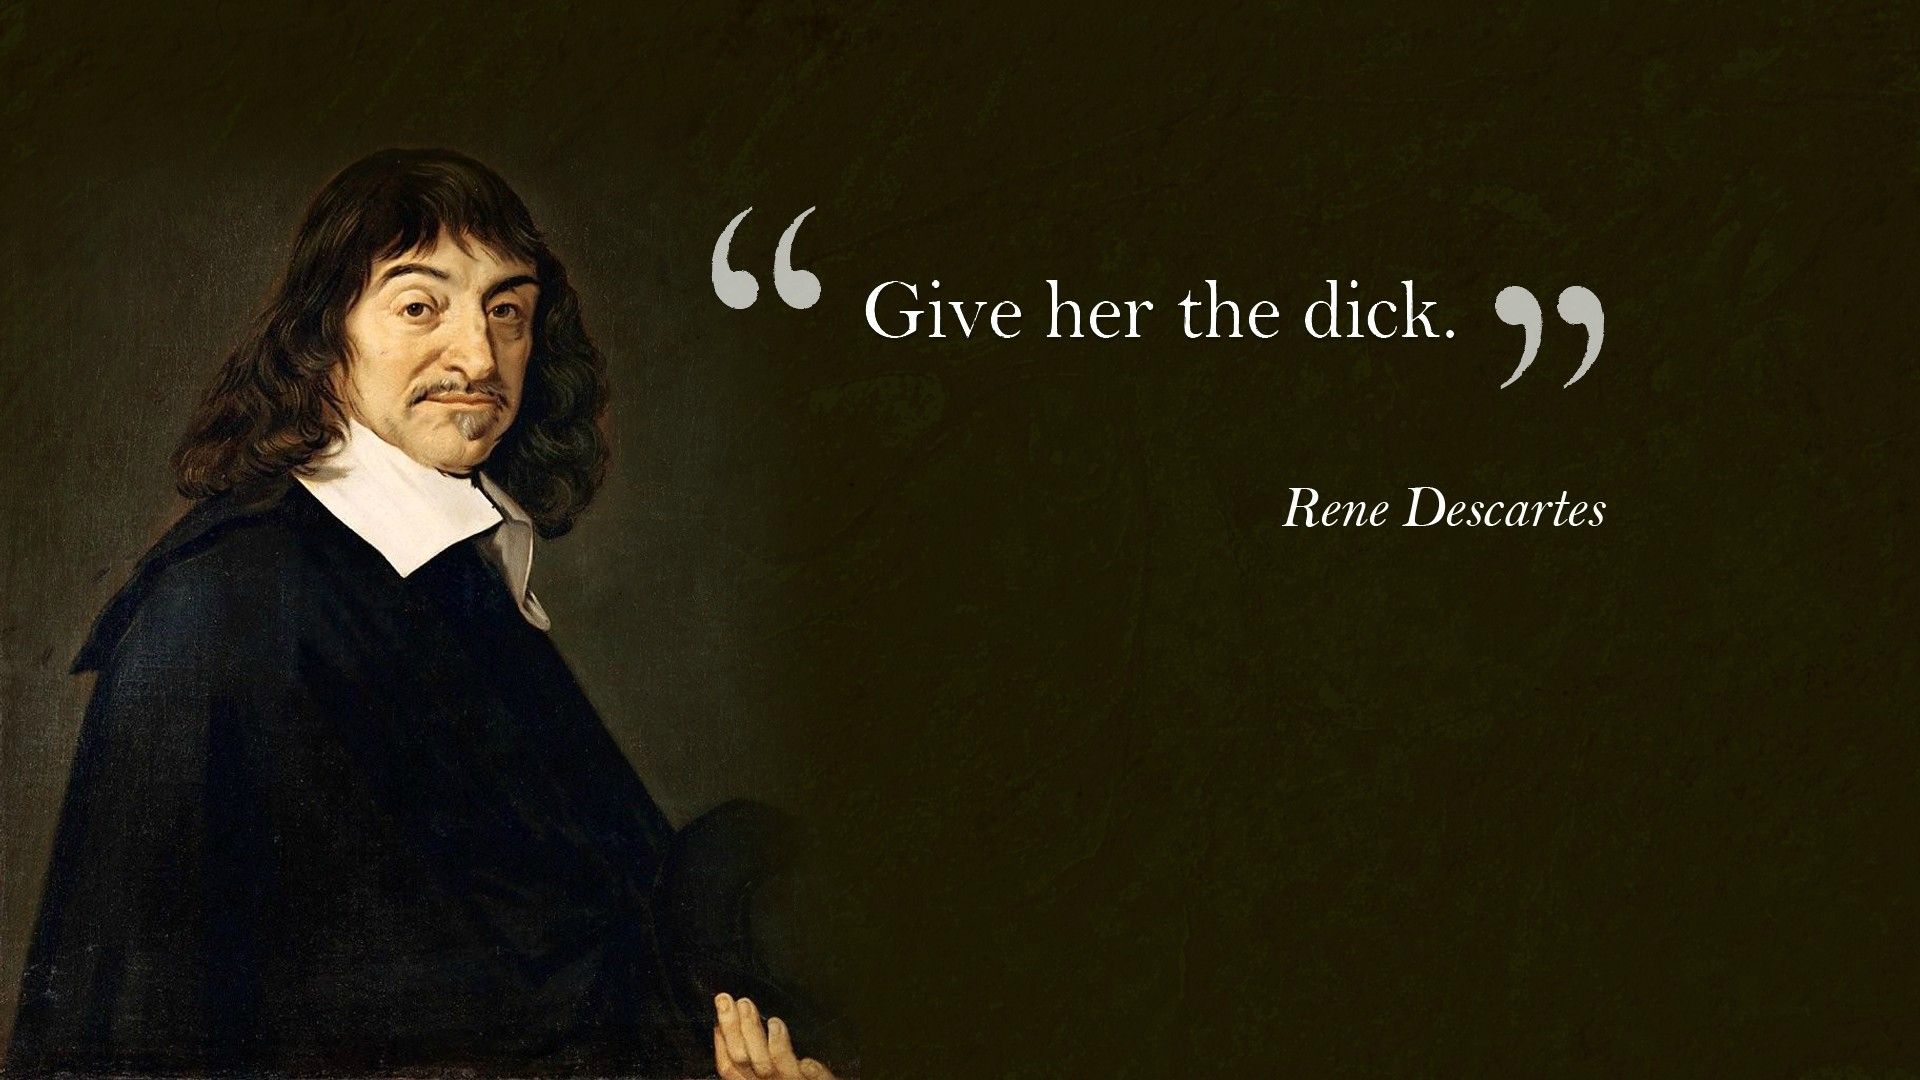 Inspiring quote by the French philosopher Rene Descartes